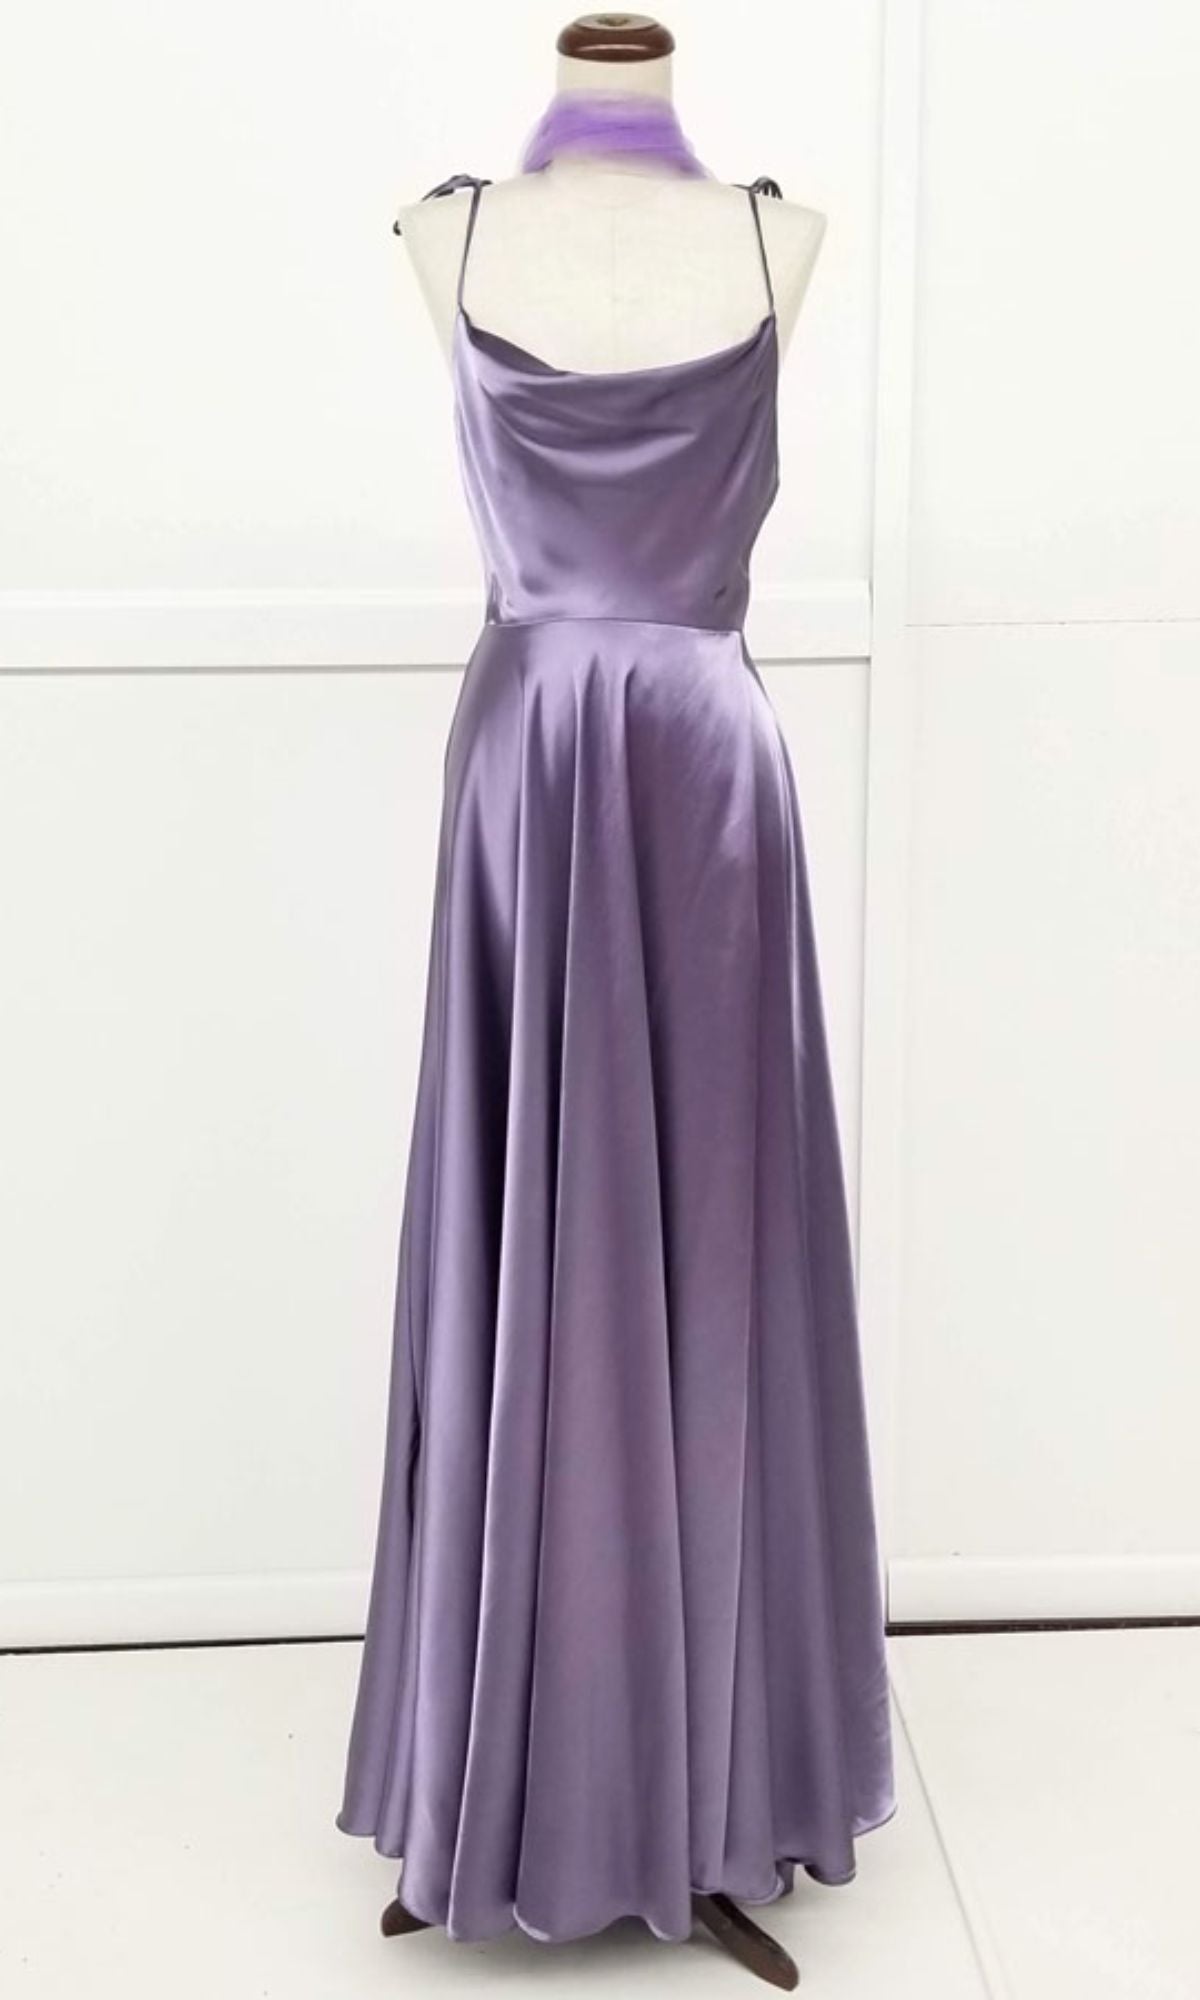 Long Prom Dress DM4018 by Chicas